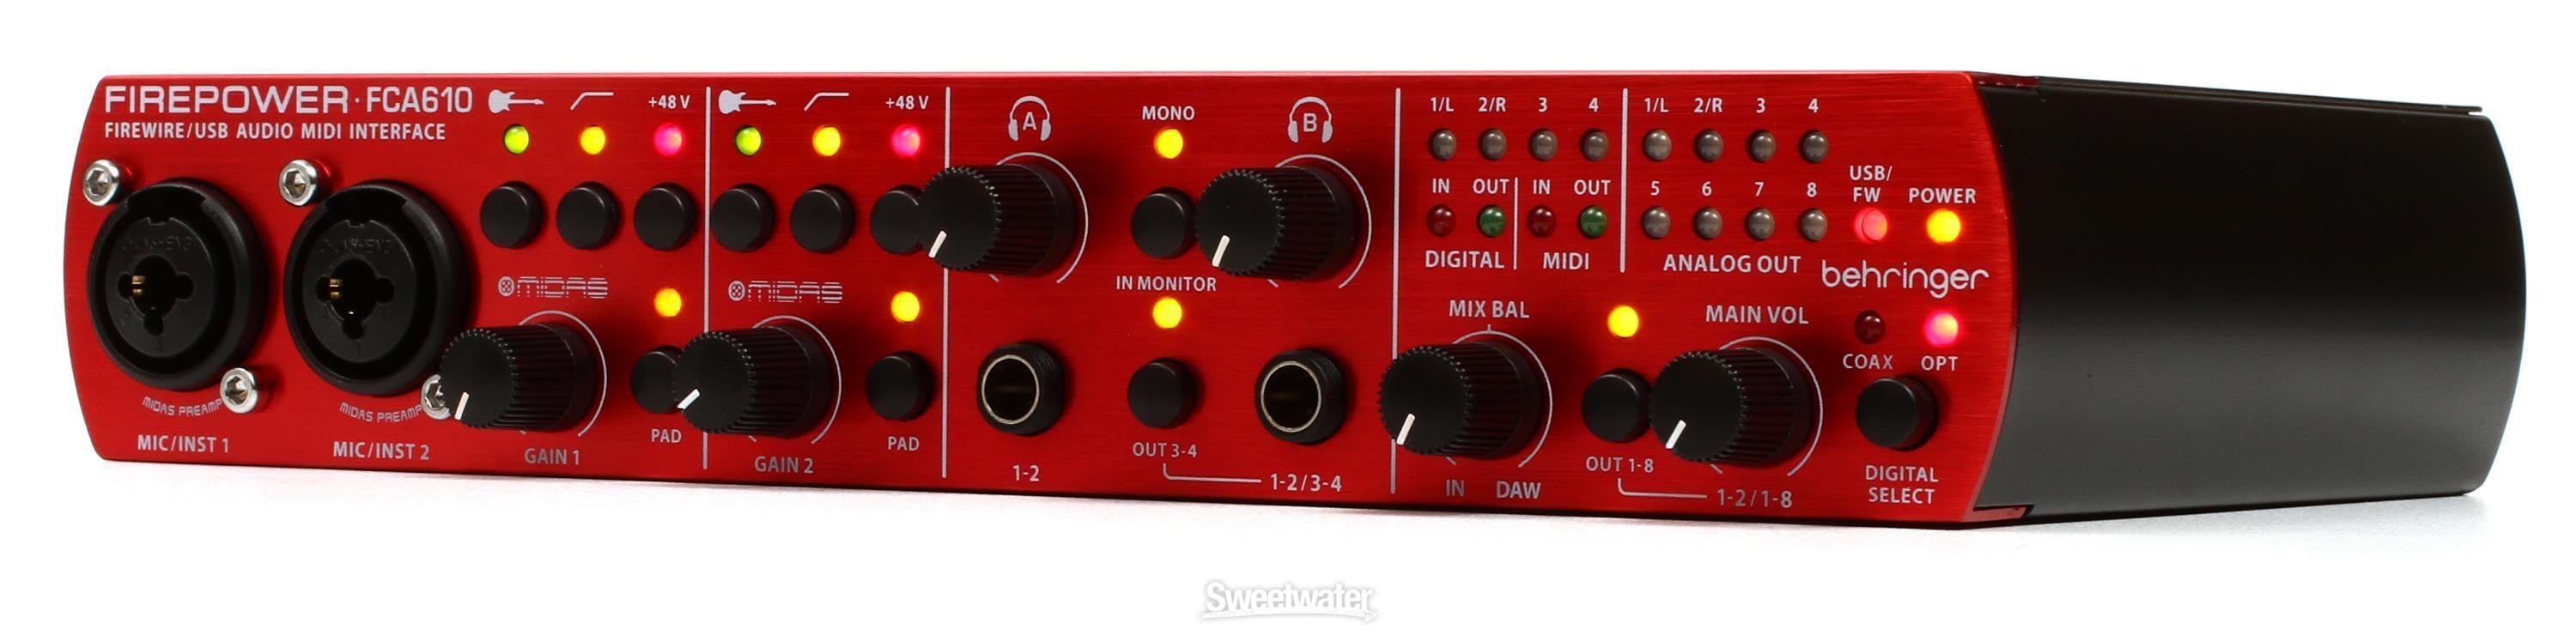 Behringer FCA610 | Sweetwater